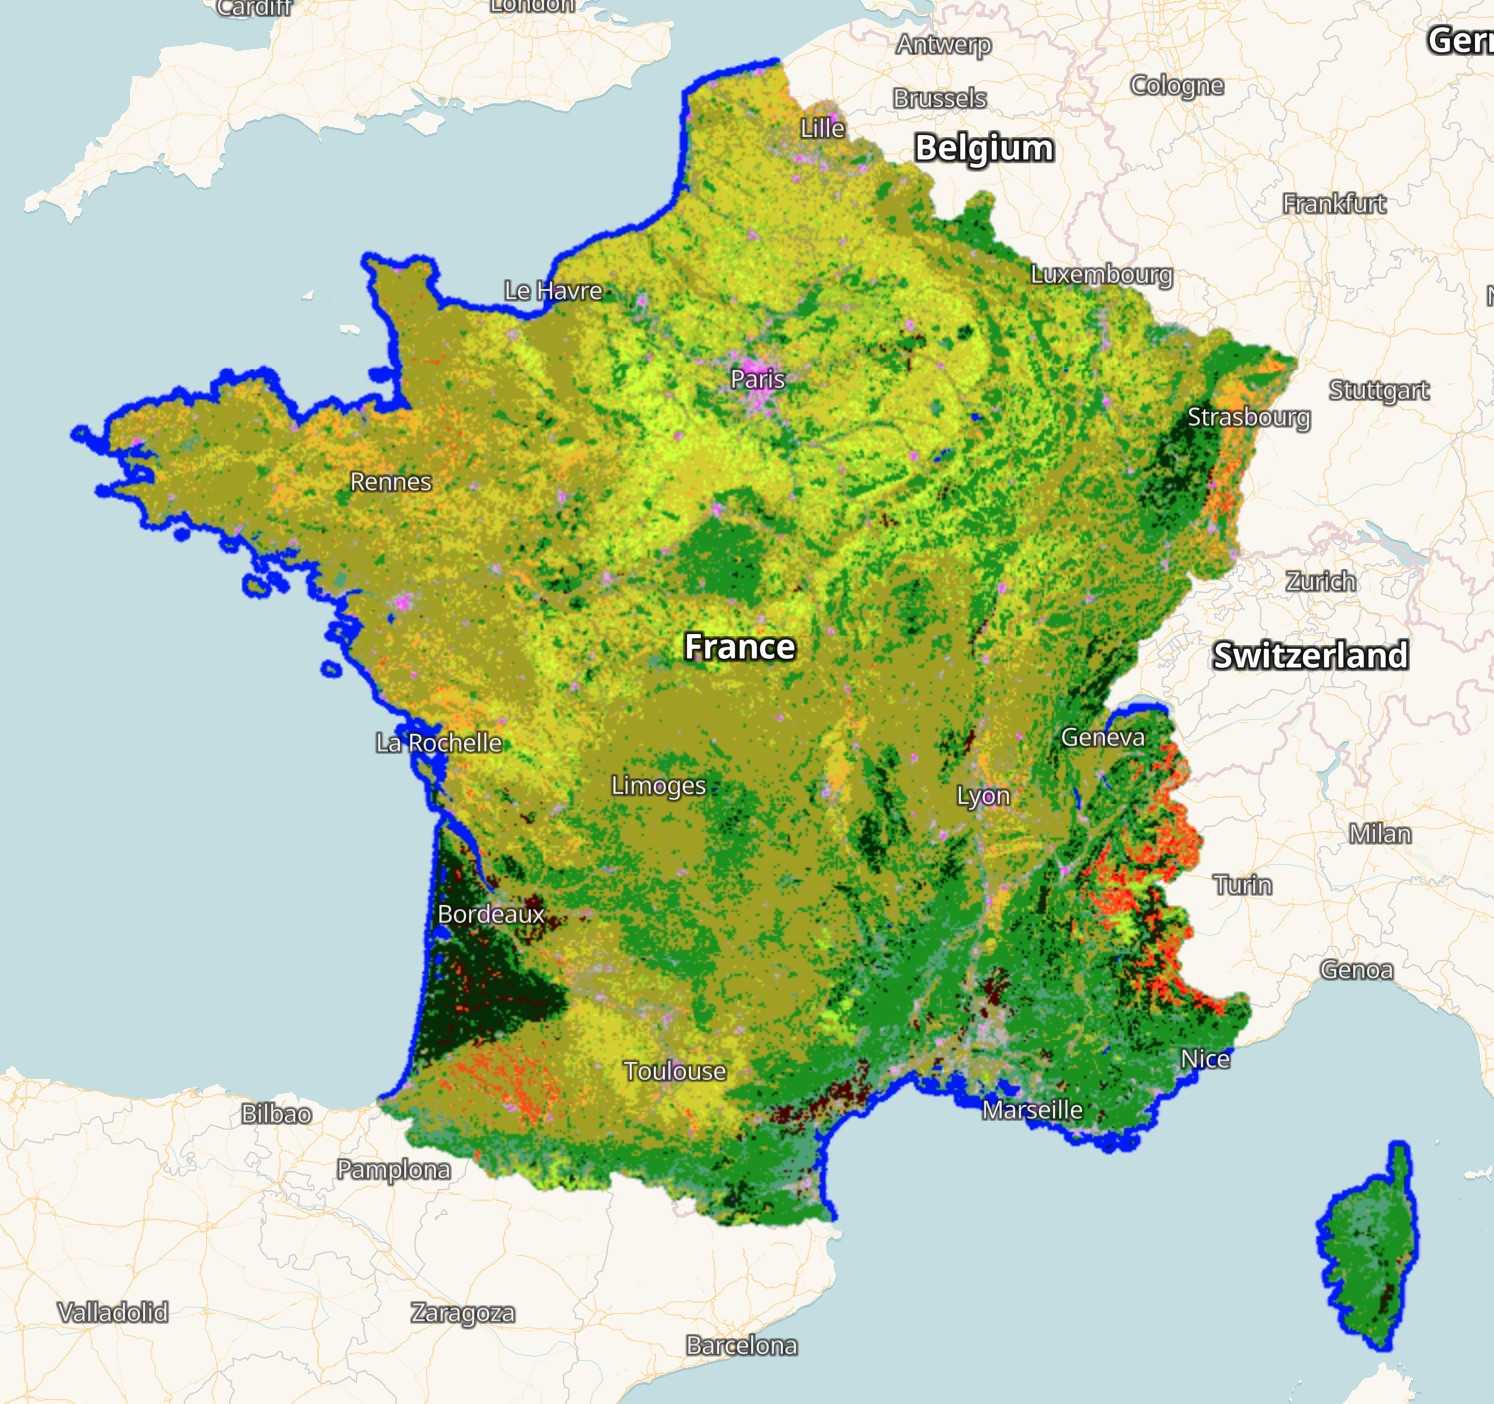 The overview of CNES land cover map